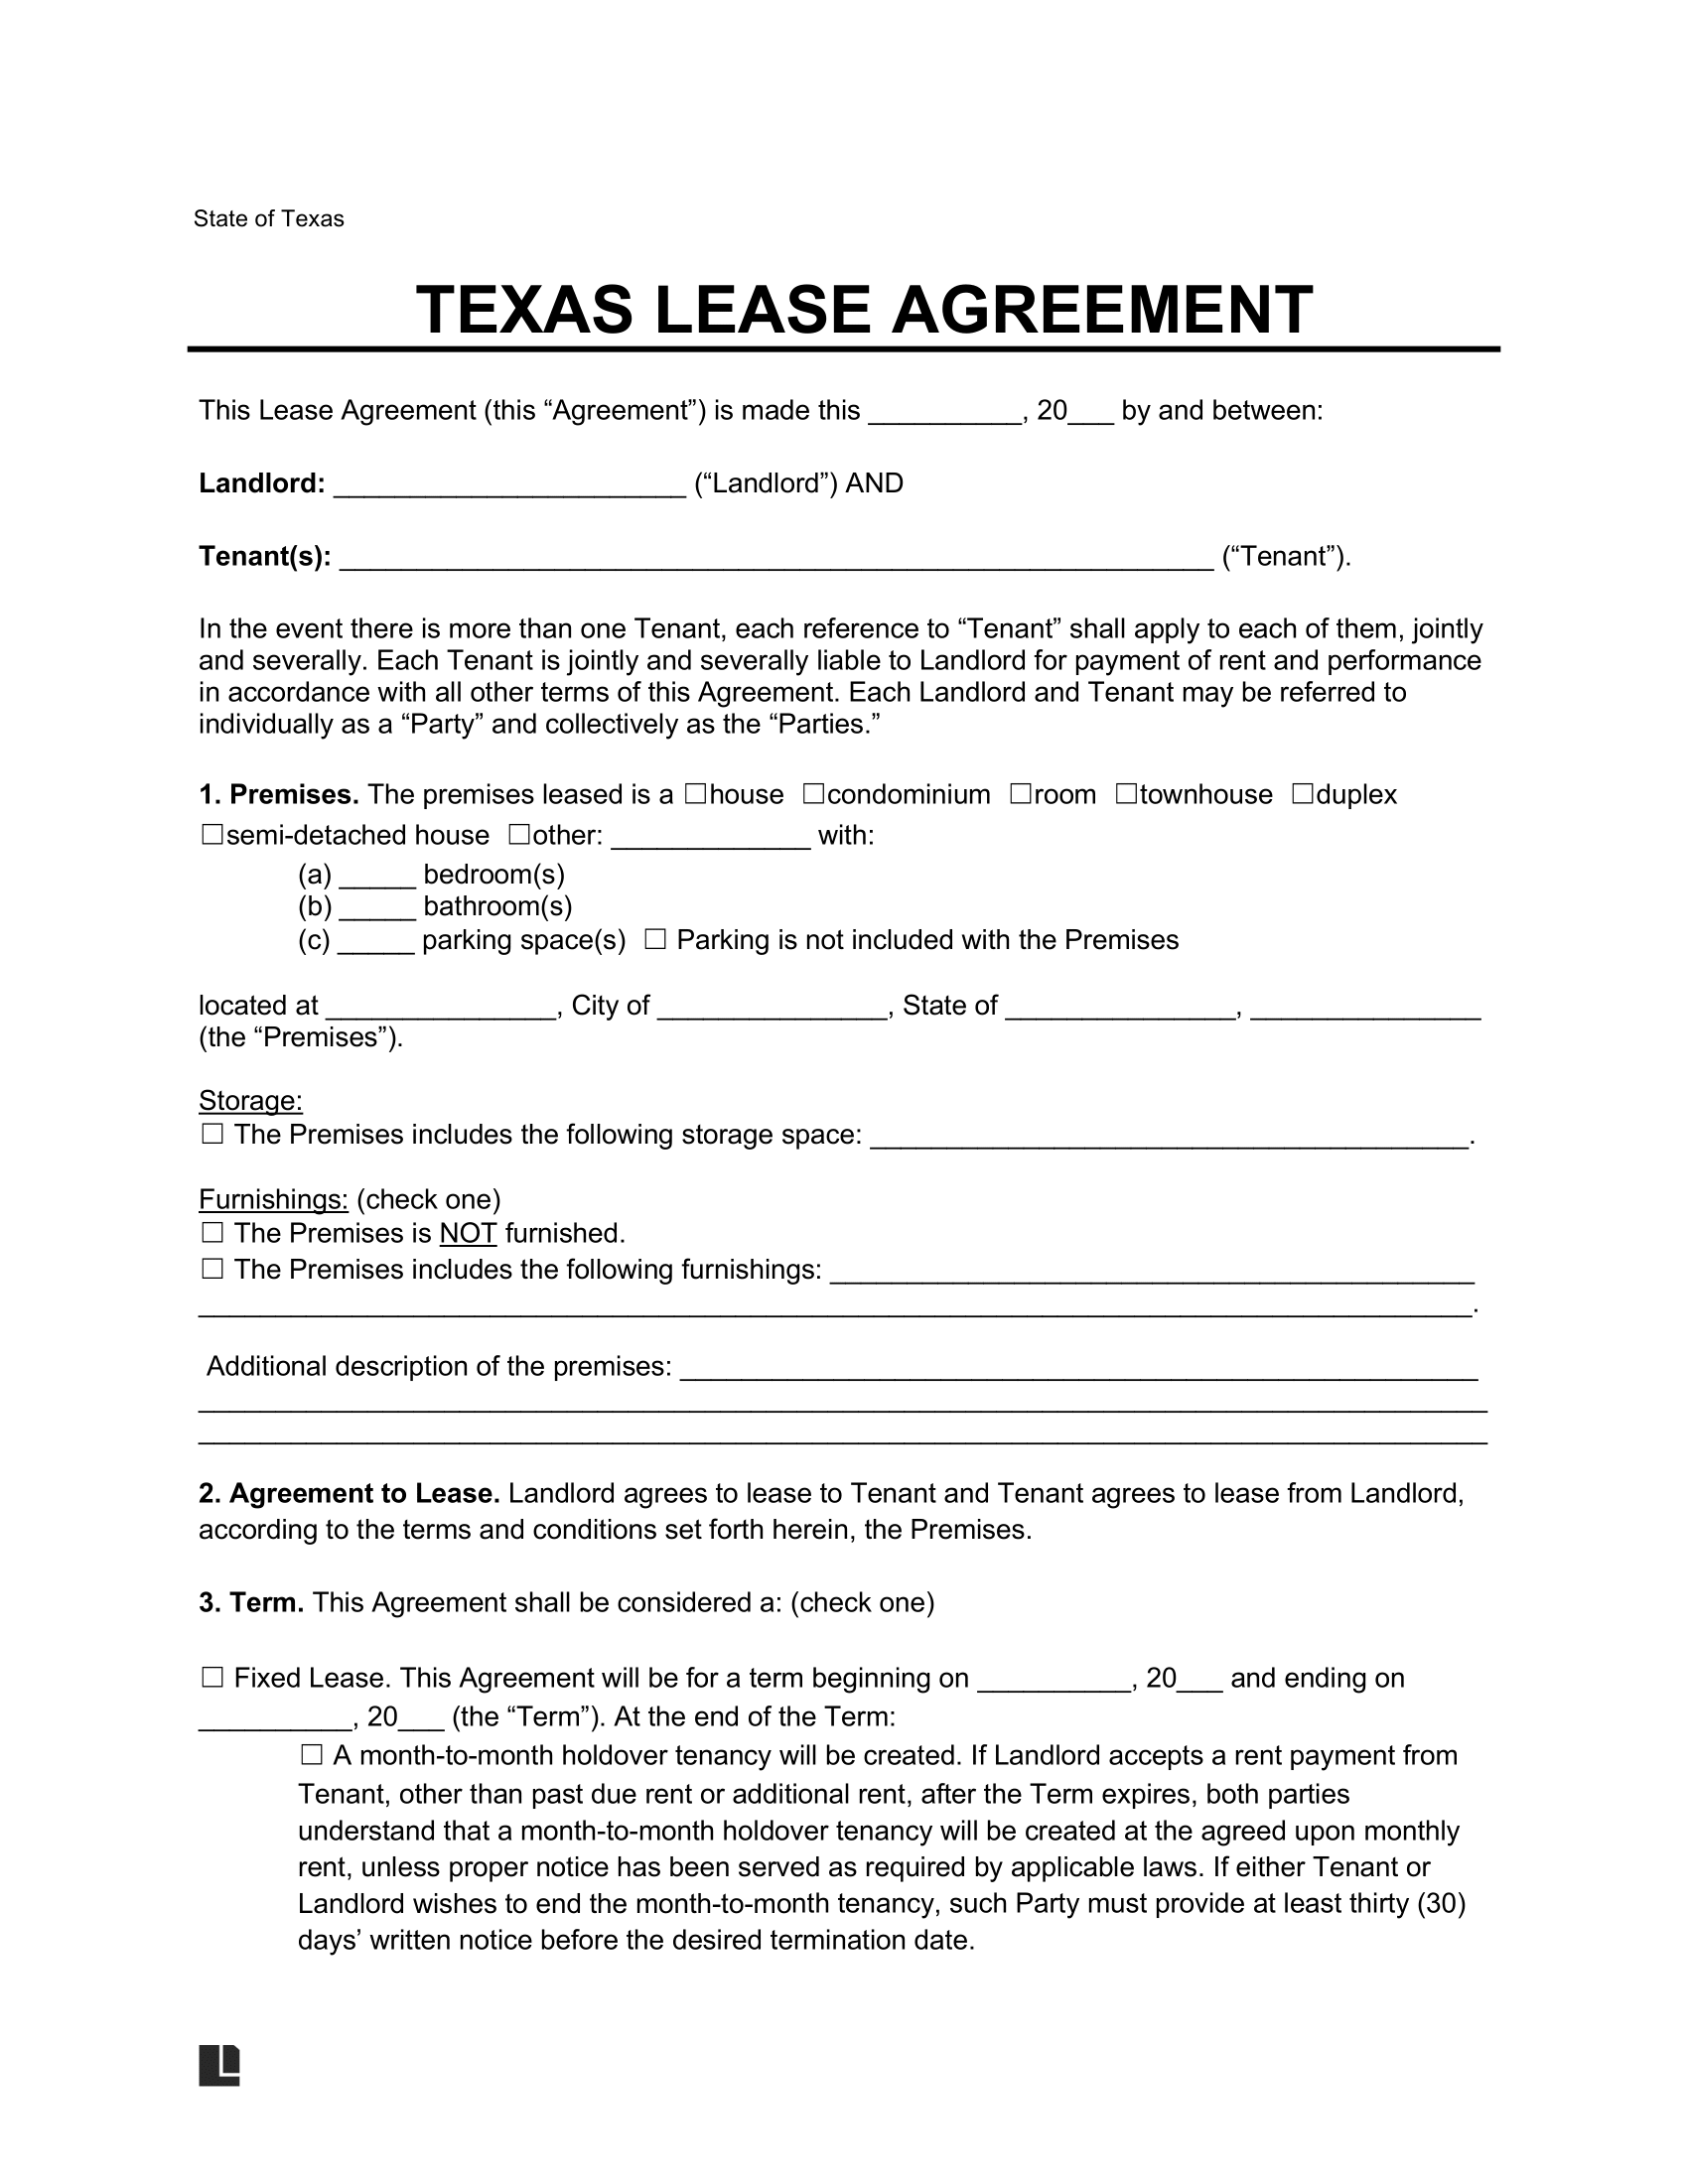 Texas Standard Residential Lease Agreement